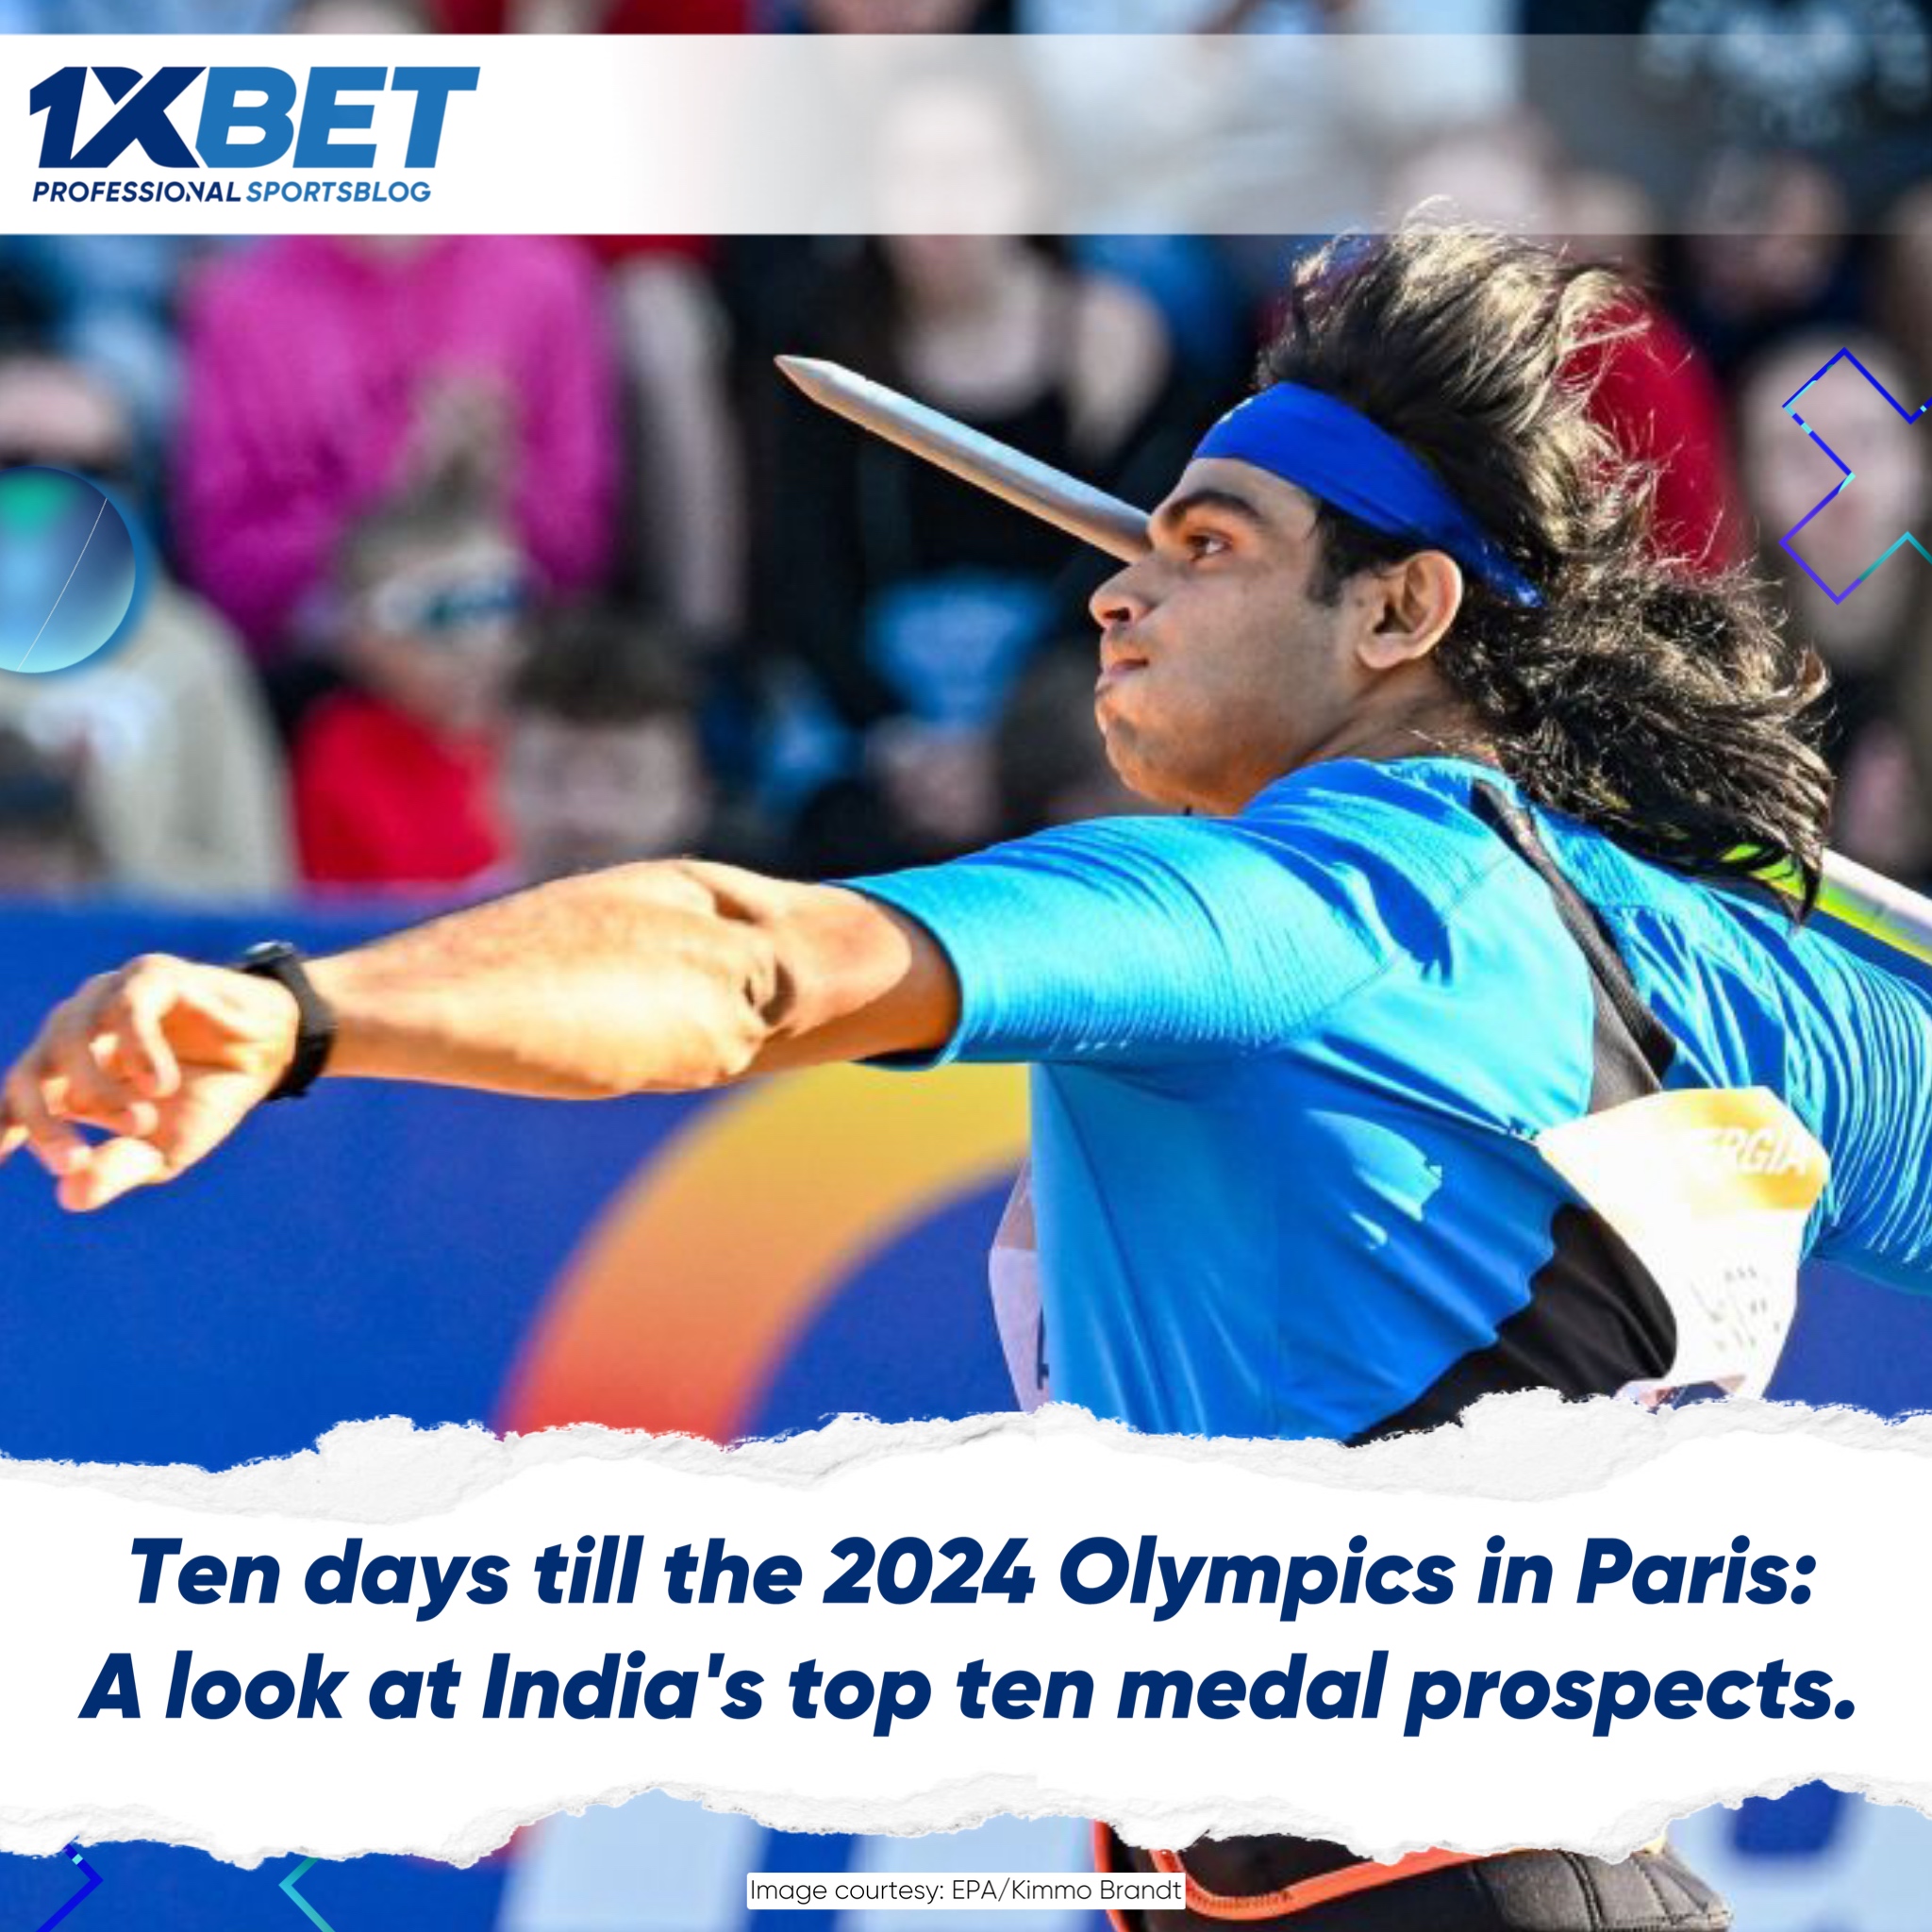 The Olympic Games Paris 2024 are on the horizon and India's top athletes are in the final stage of their preparations.